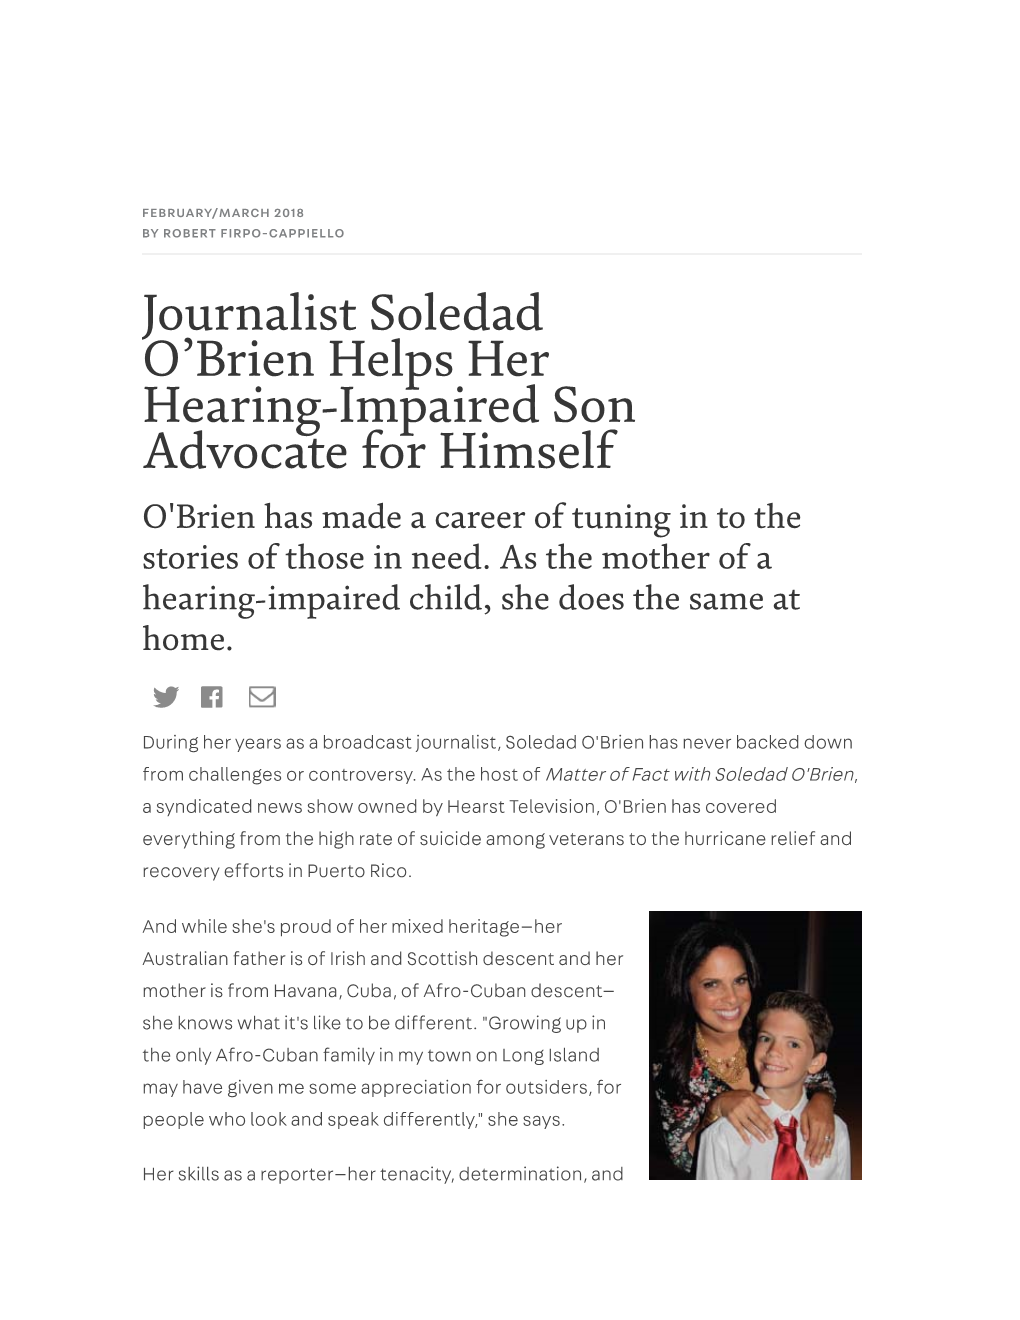 Journalist Soledad O'brien Helps Her Hearing-Impaired Son Advocate for Himself